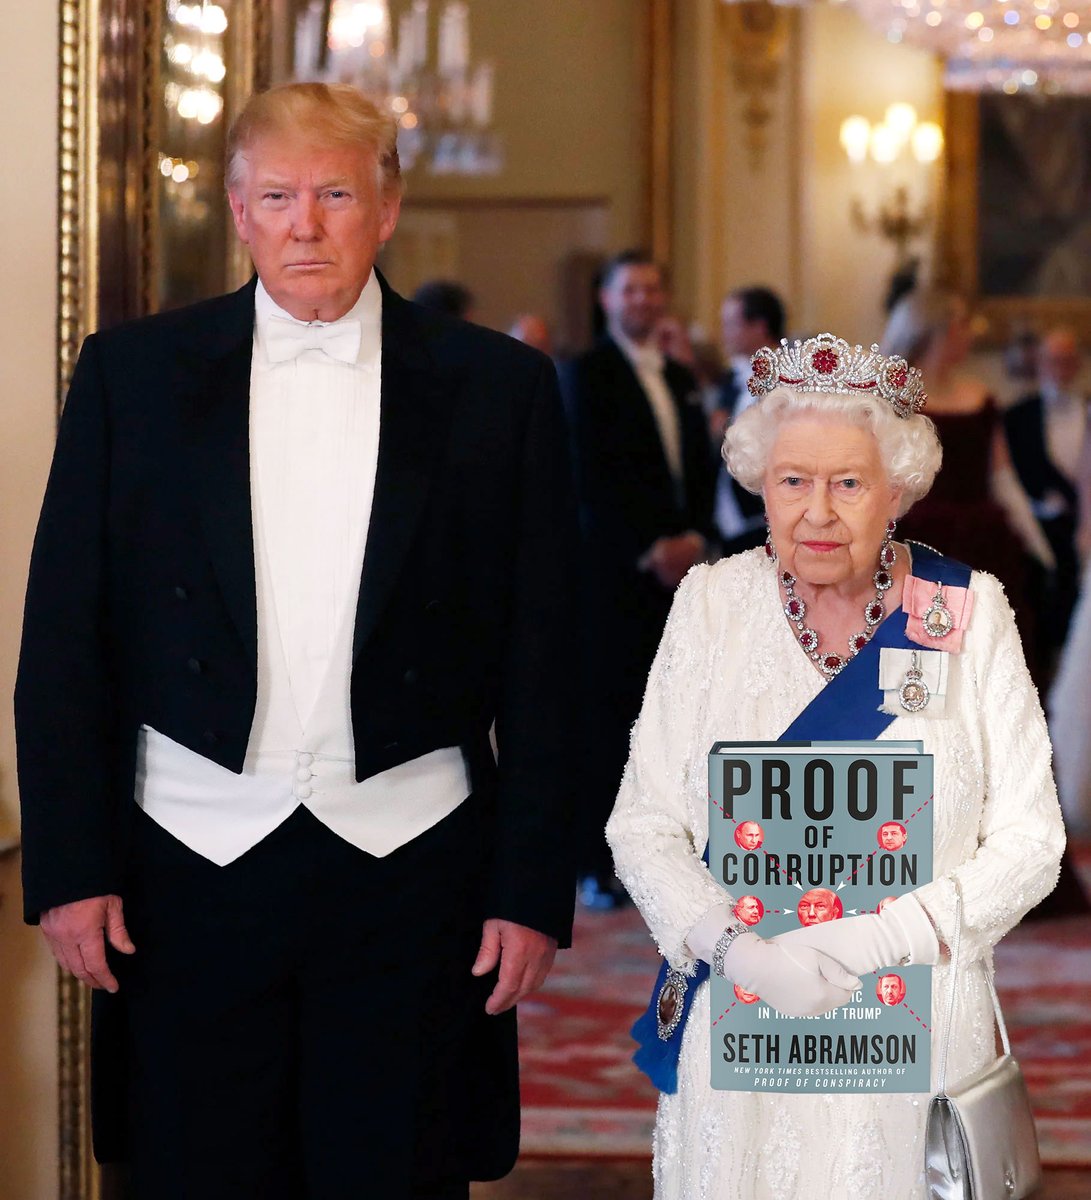 (ENTRIES 9) Just floored by what I'm seeing. More contenders below. For a moment I wanted to say the copy of Proof of Corruption being clutched by the Queen of England like a protective barrier between her and Trump was too big... then I thought, no, it's *way* funnier oversized.